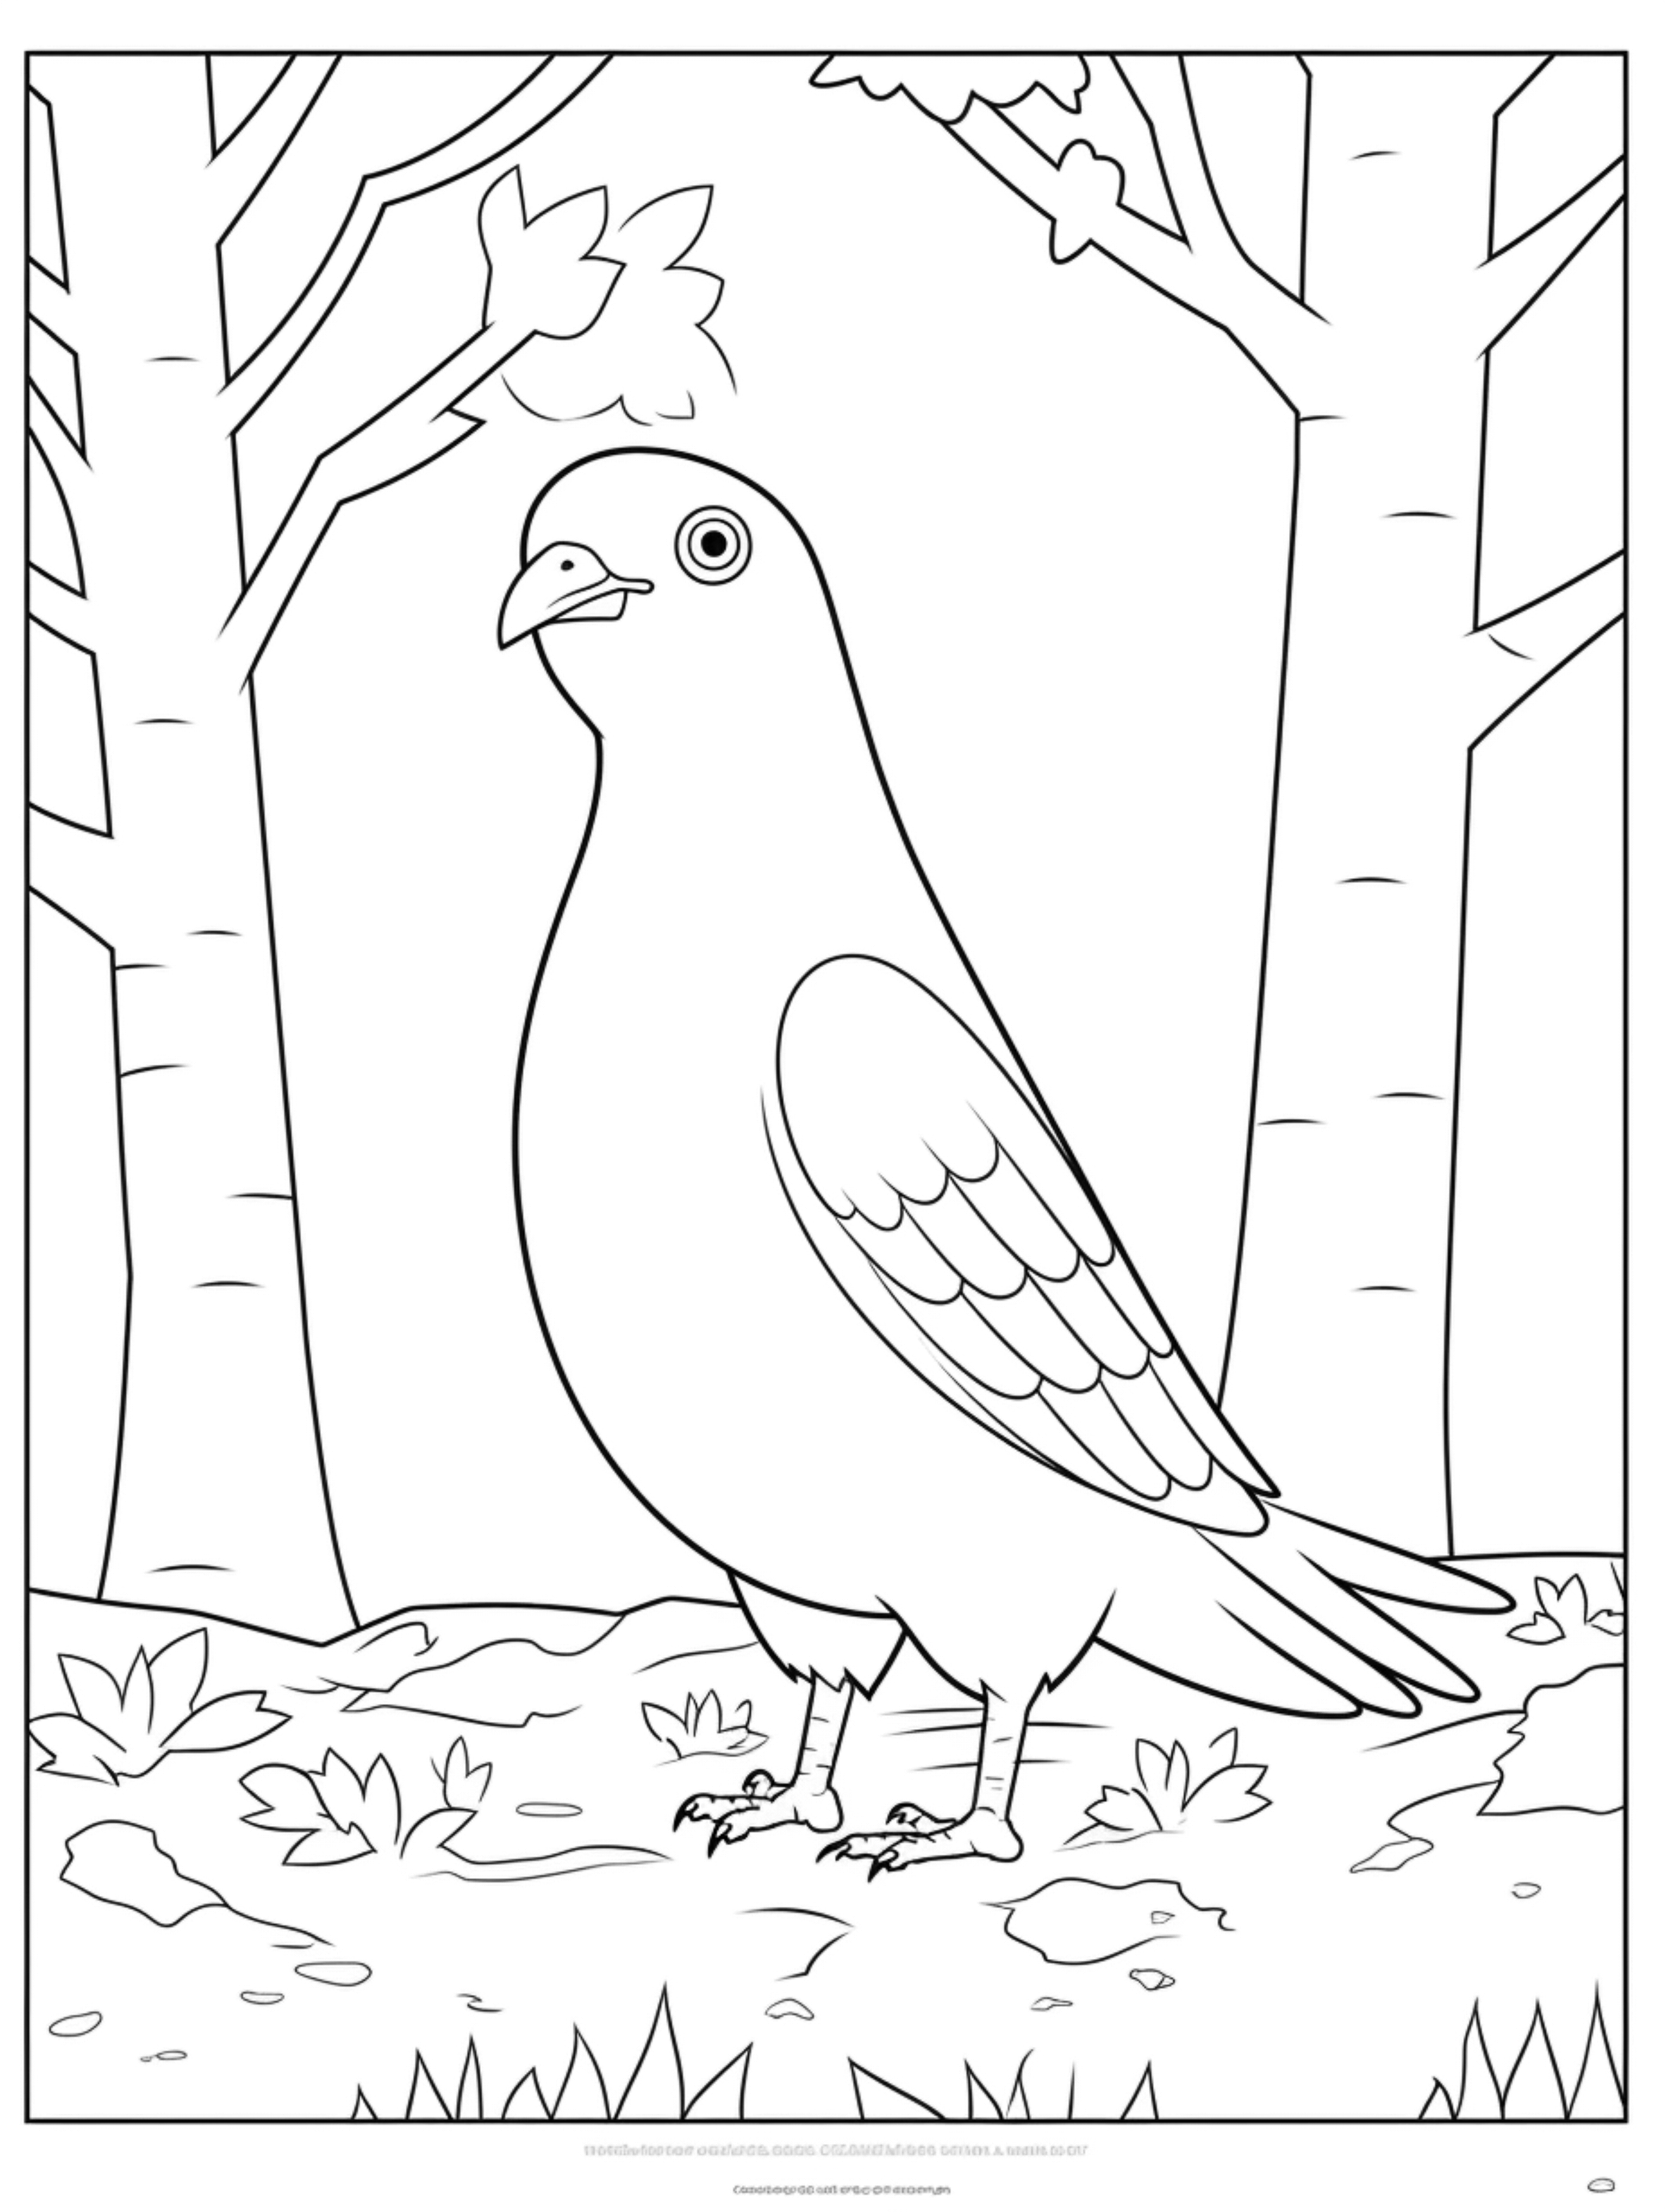 01 cute pigeon in its habitat coloring page for kids